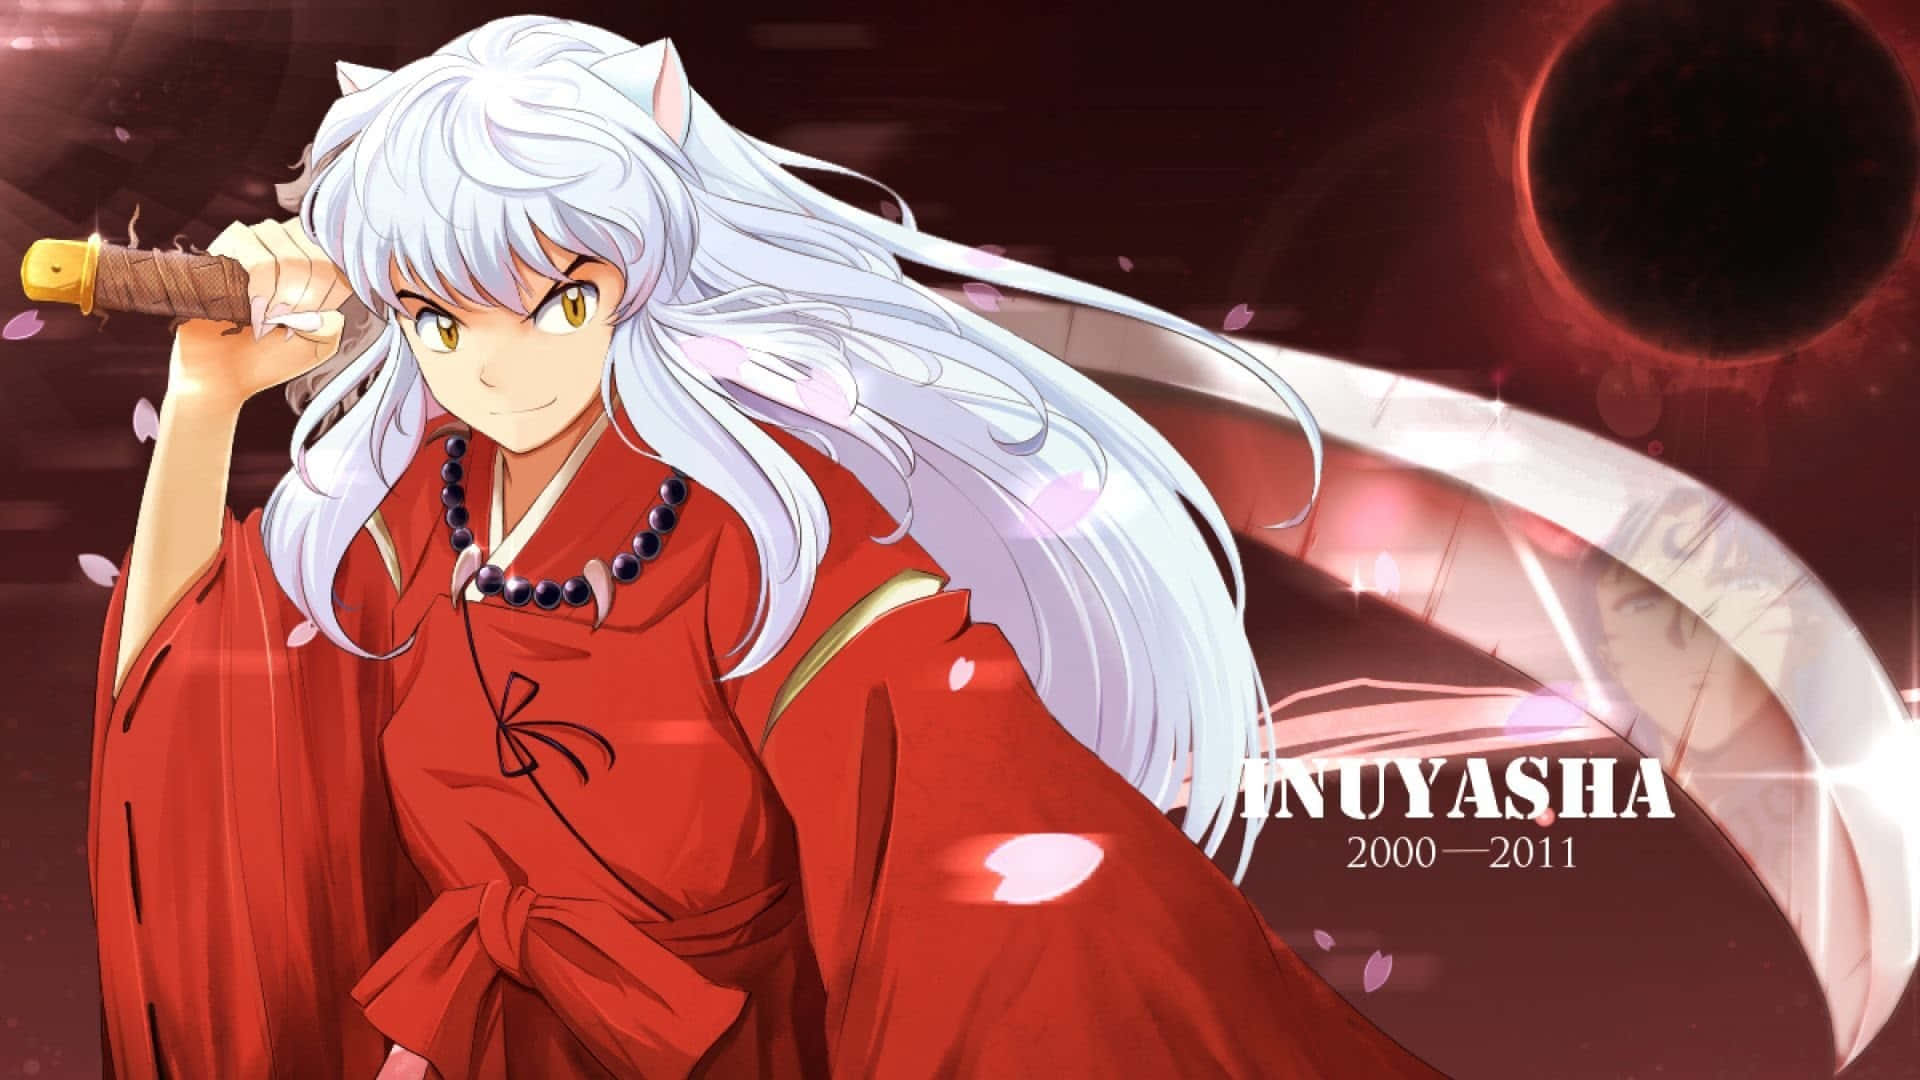 An iconic image of Inuyasha, the courageous and heroic half-demon warrior.